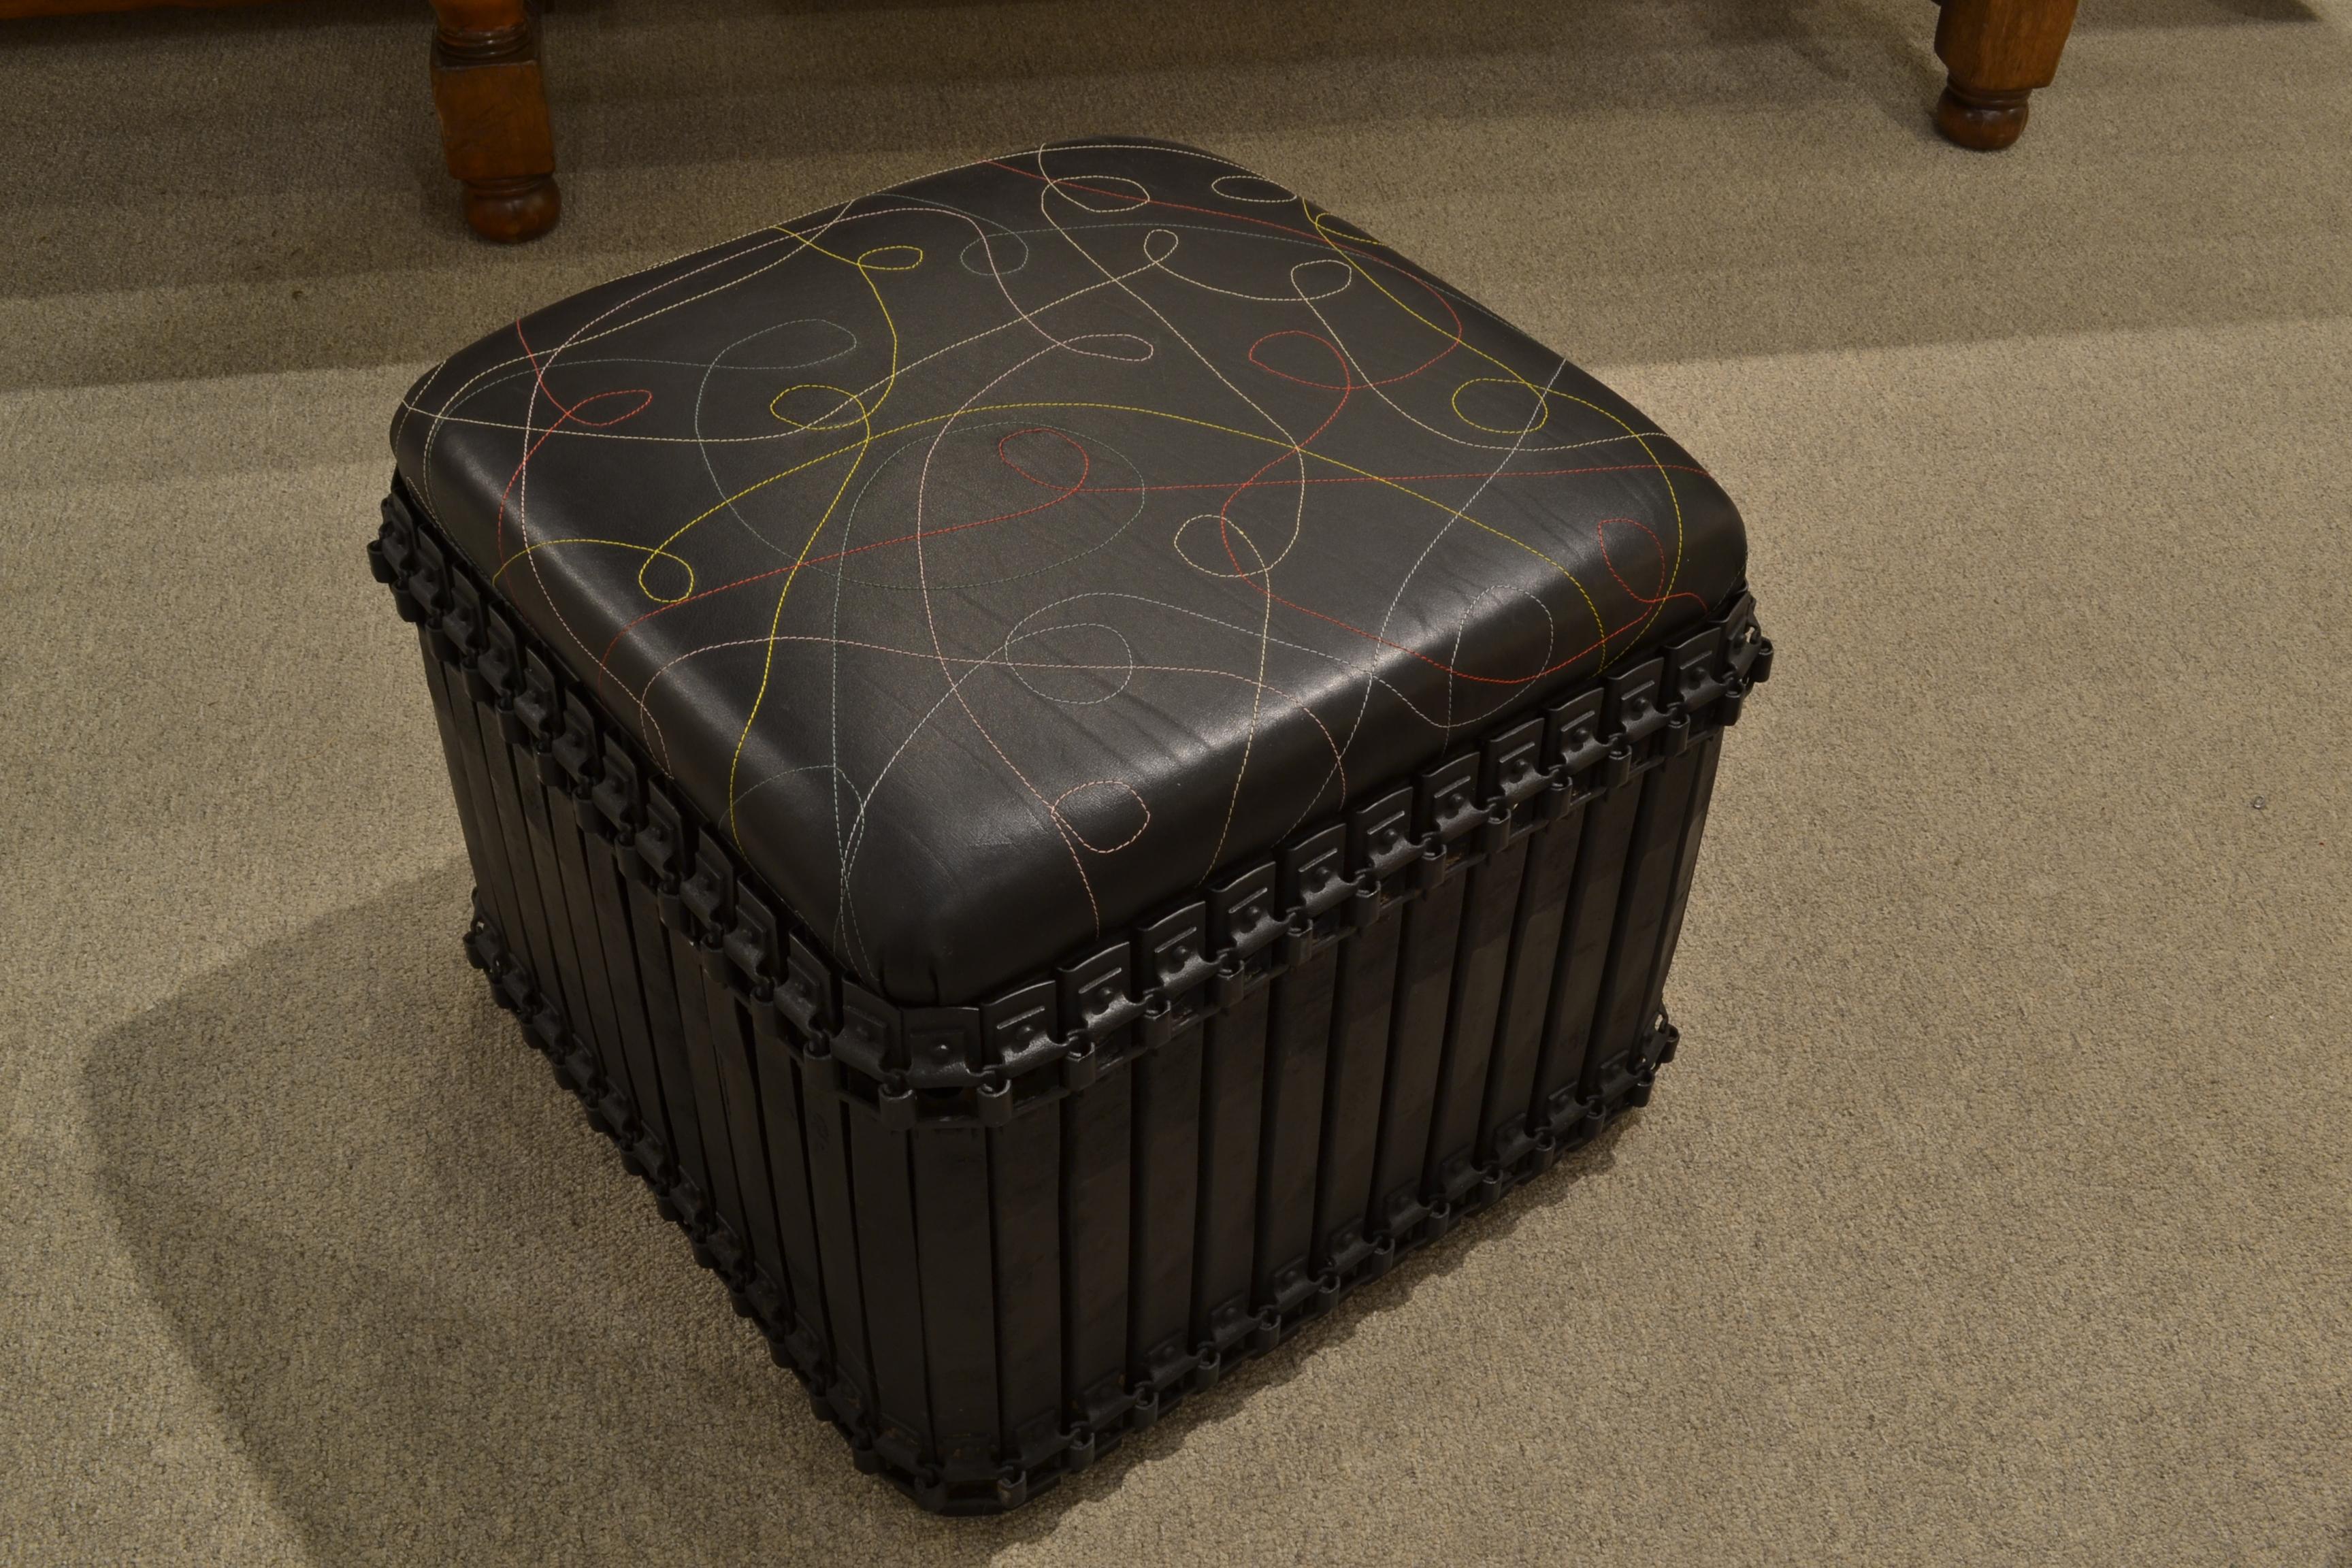 Our popular rust belt ottoman in a smaller, square shape with a blackened base. Shown in custom stitched leather.

These pieces can also be customized in the COL or COM of your choosing. Due to the nature of the old metal used, some variation in